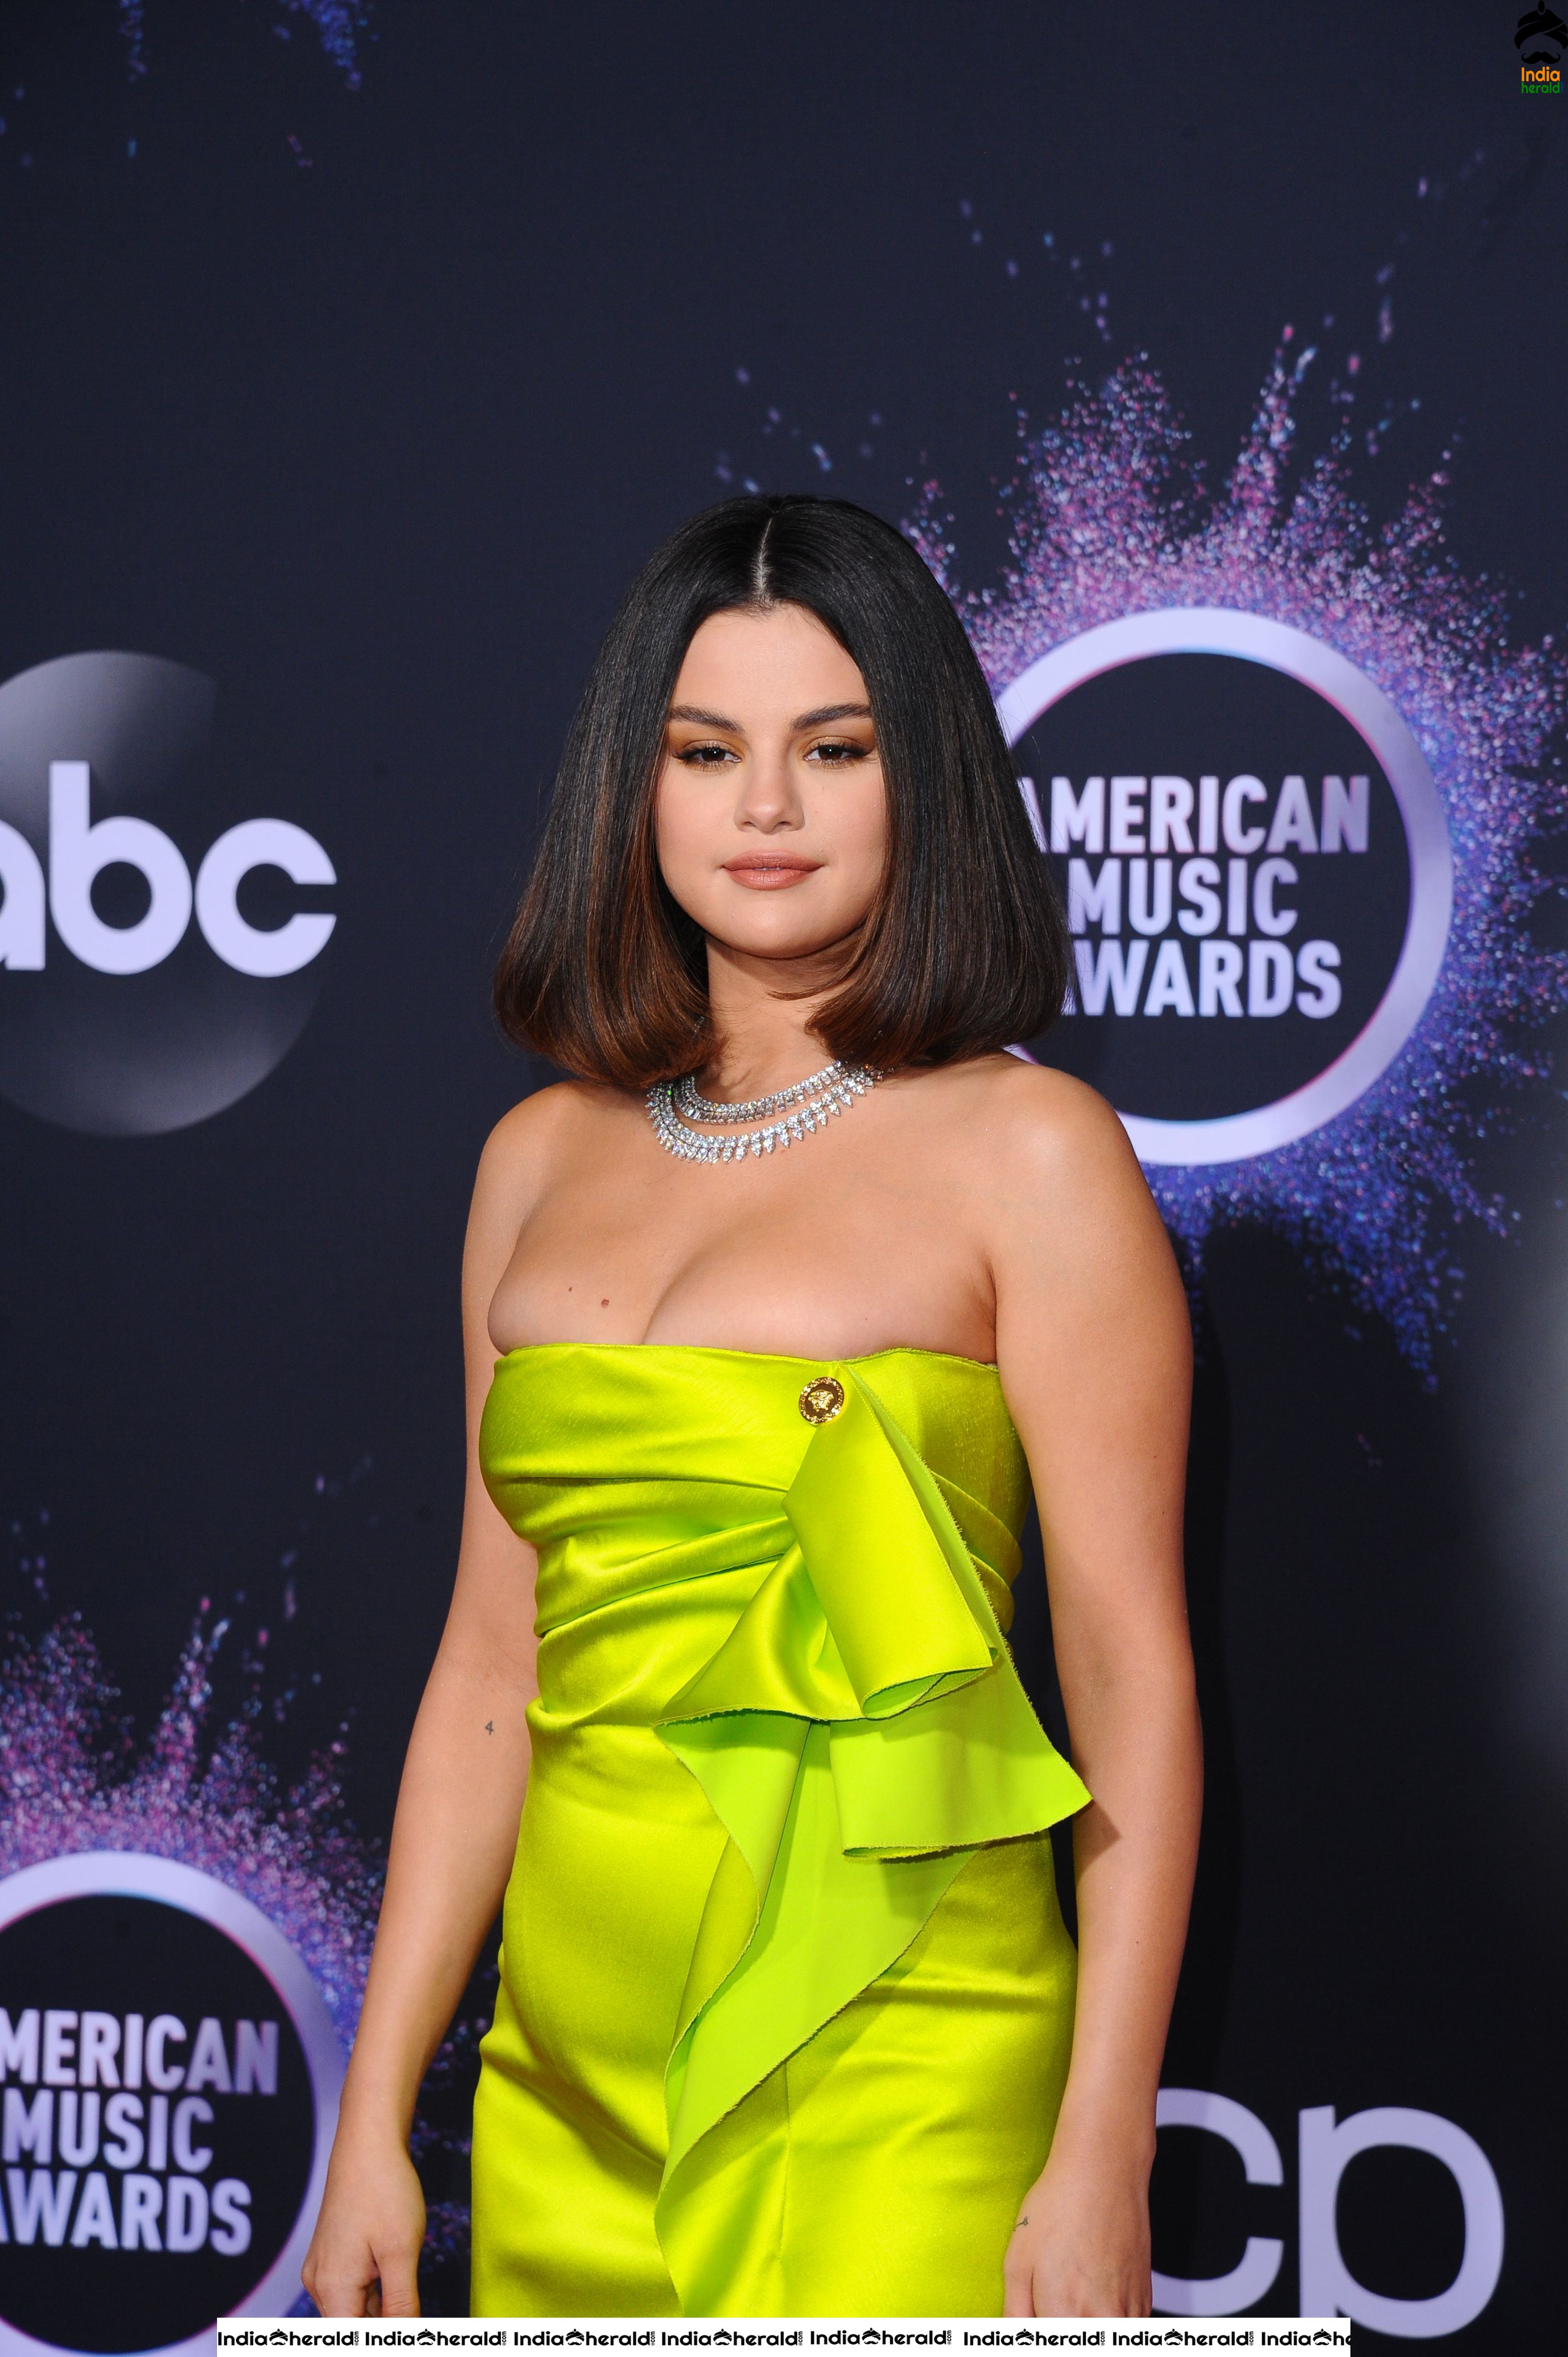 Selena Gomez at the 2019 American Music Awards in Los Angeles Set 2